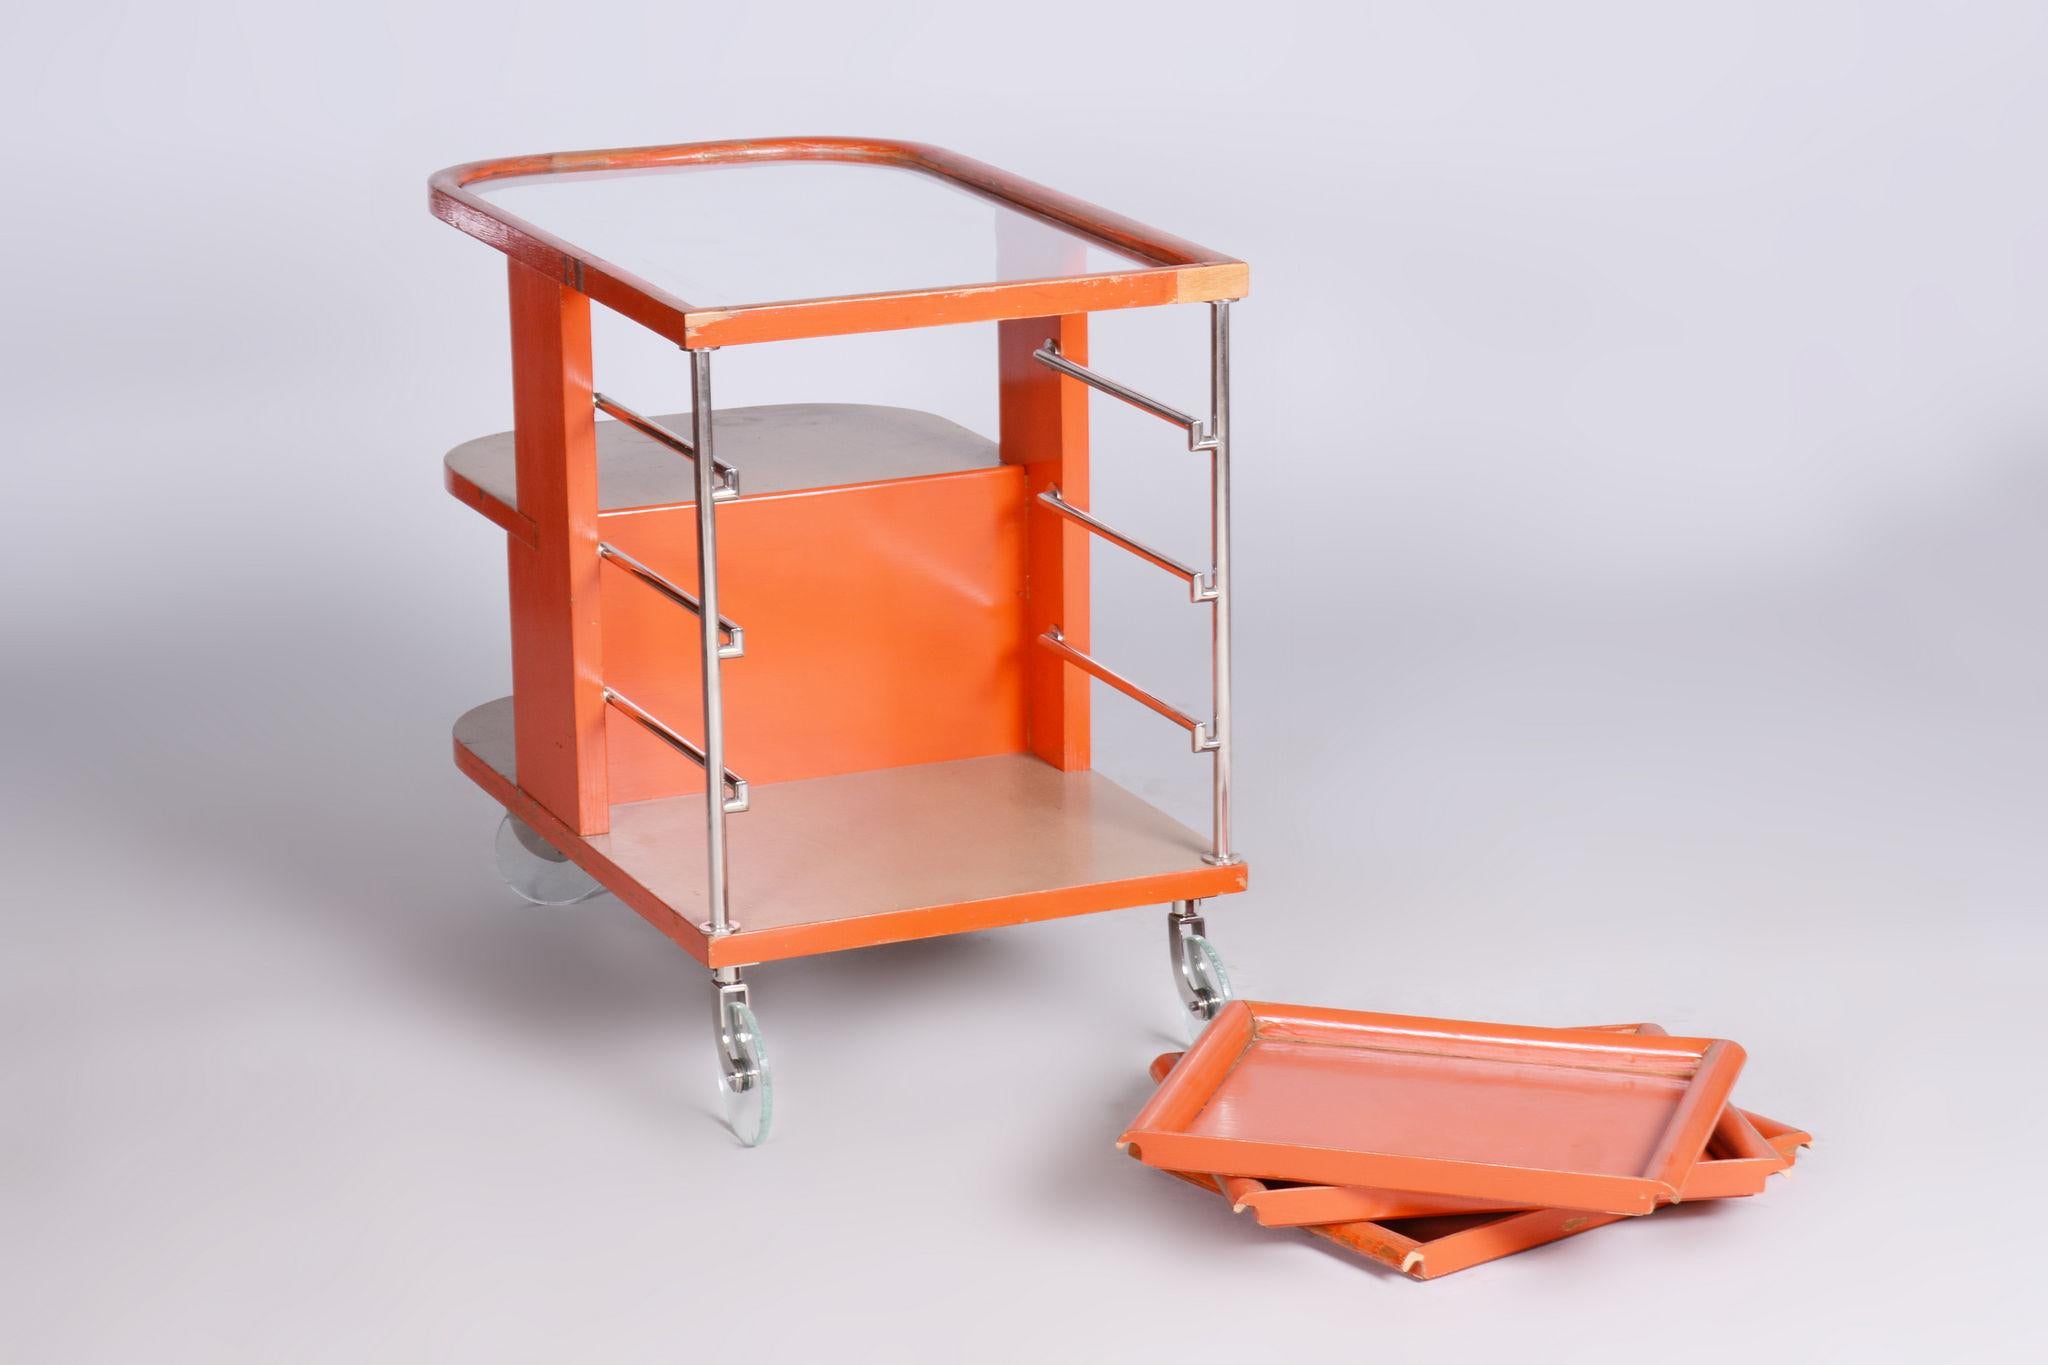 Restored Bauhaus Trolley.
Unique custom production from the company Mücke-Melder.

Period: 1920-1929
Maker: Mücke - Melder
Source: Czechia (Czechoslovakia)
Material: Beech, Chrome-Plated Steel, Glass

The chrome parts have been cleaned and